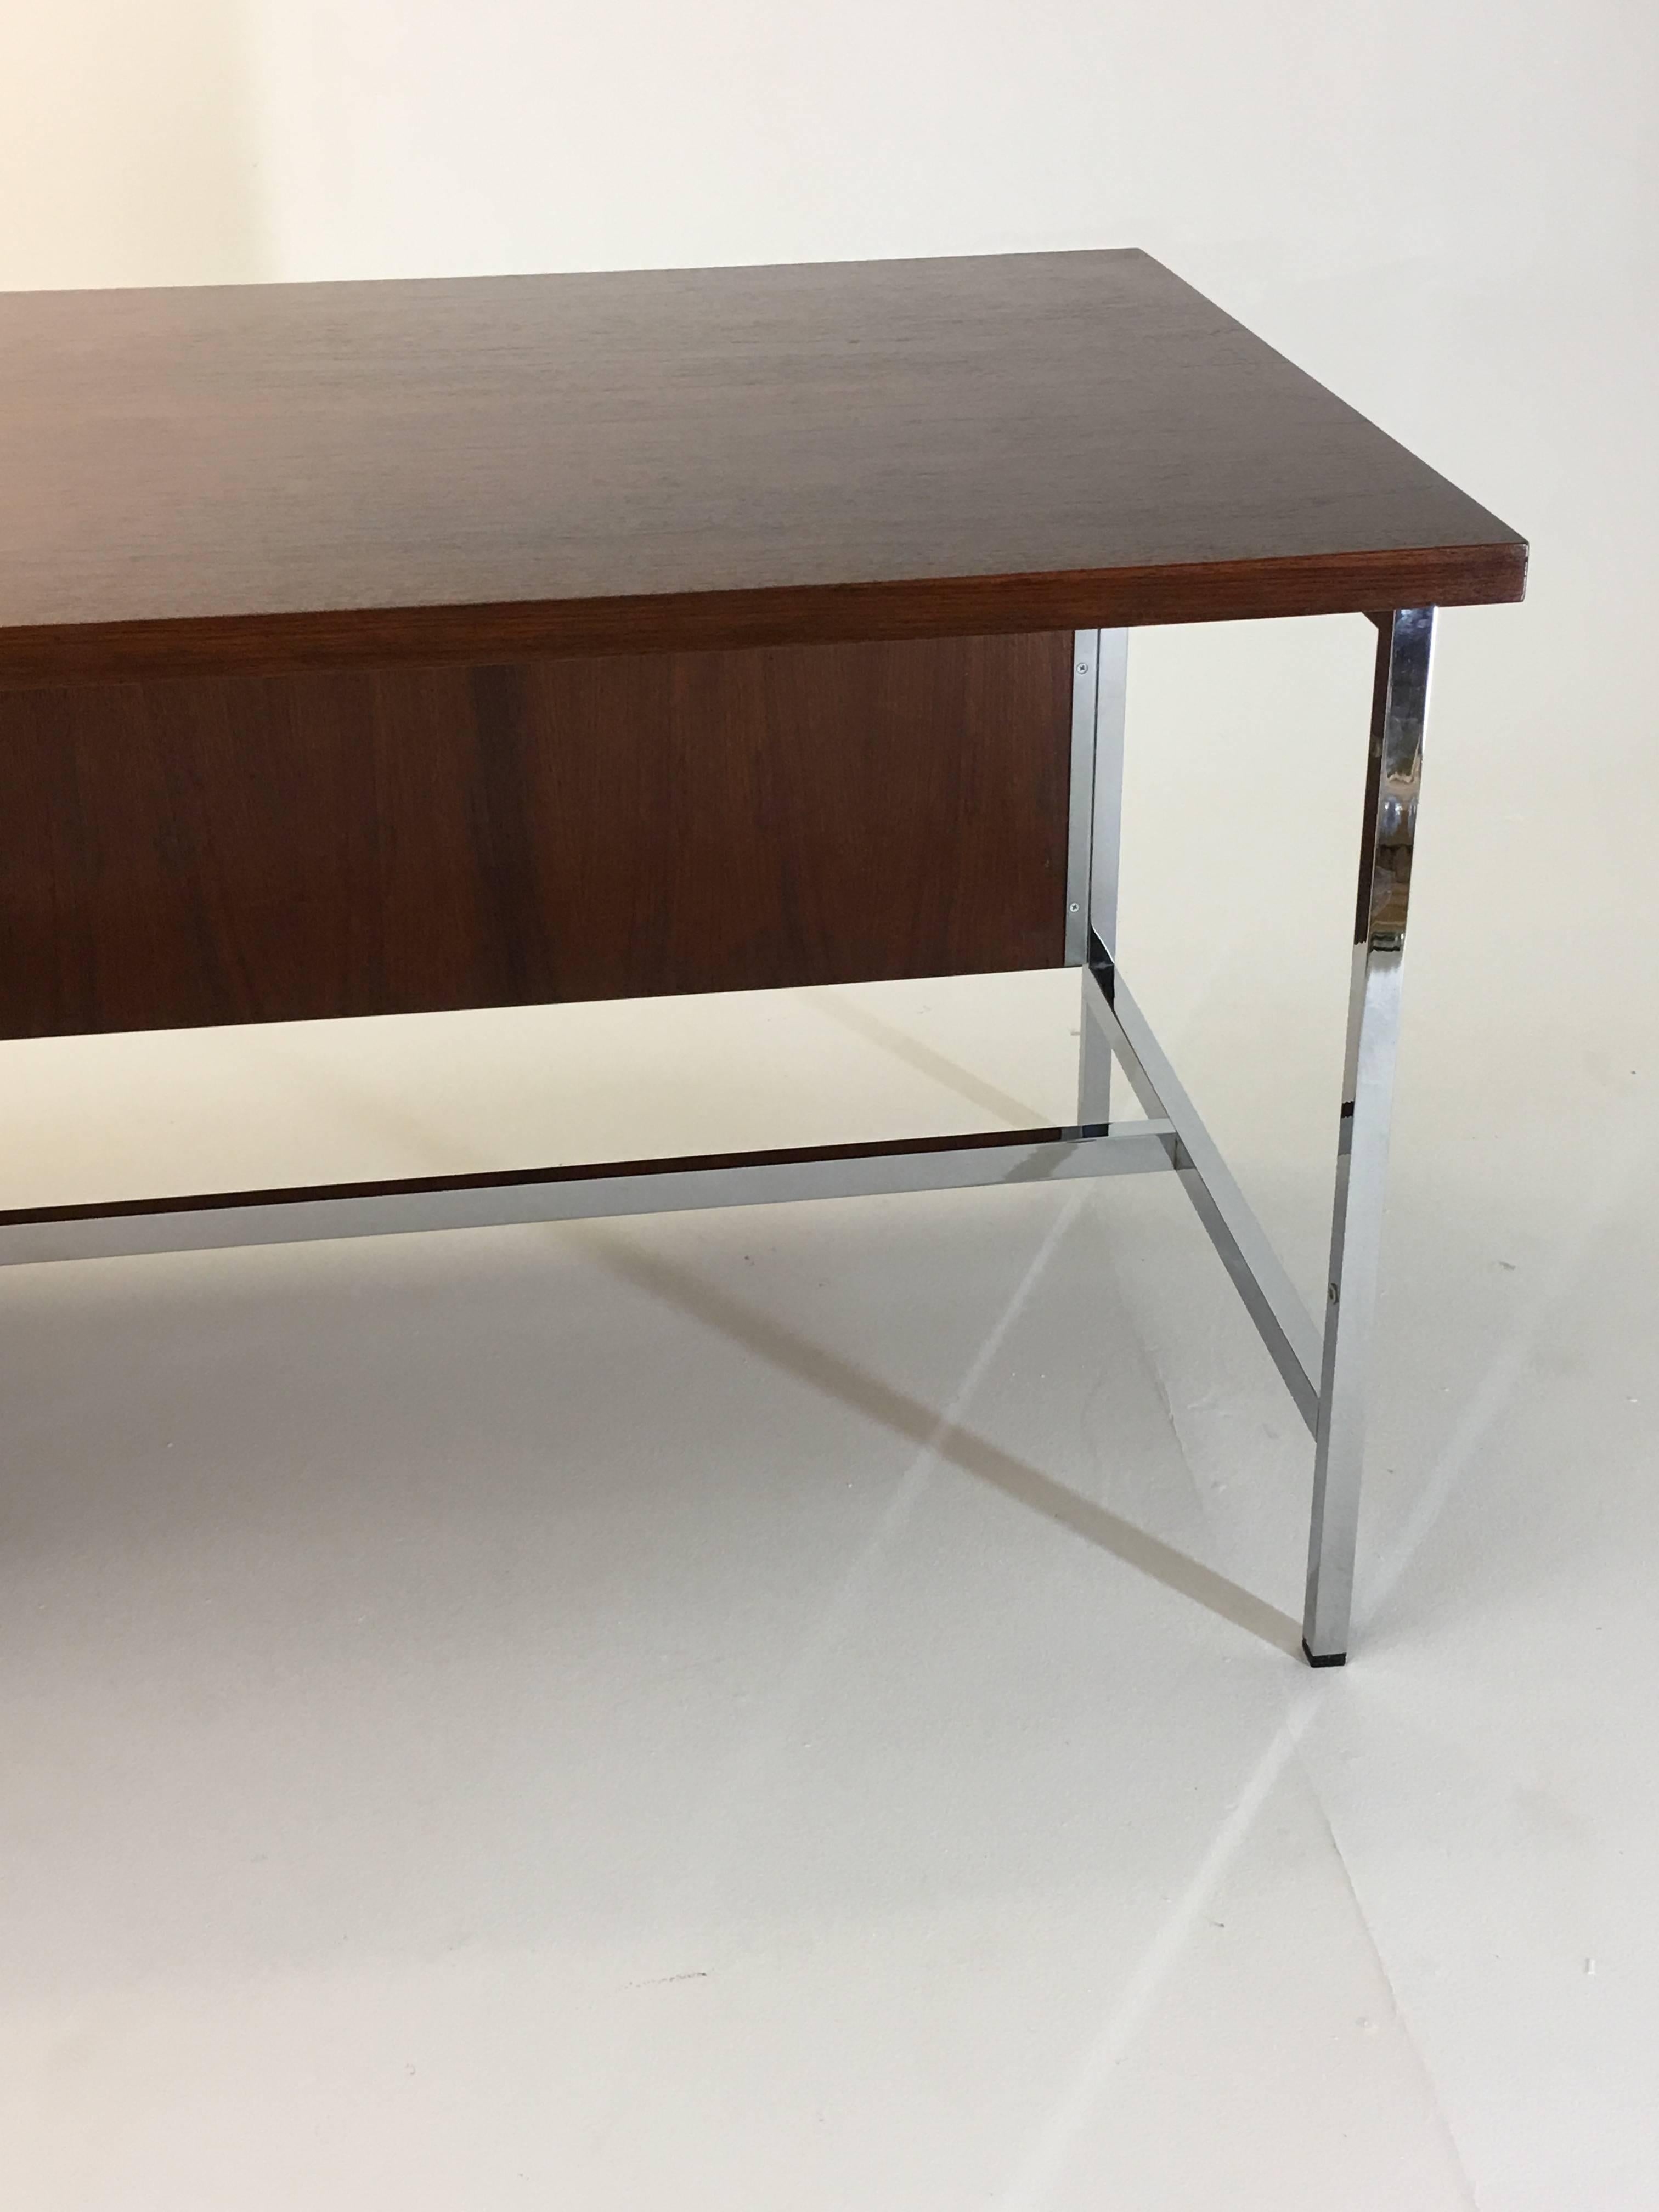 American Florence Knoll Executive Single Pedestal Desk in Walnut and Chrome